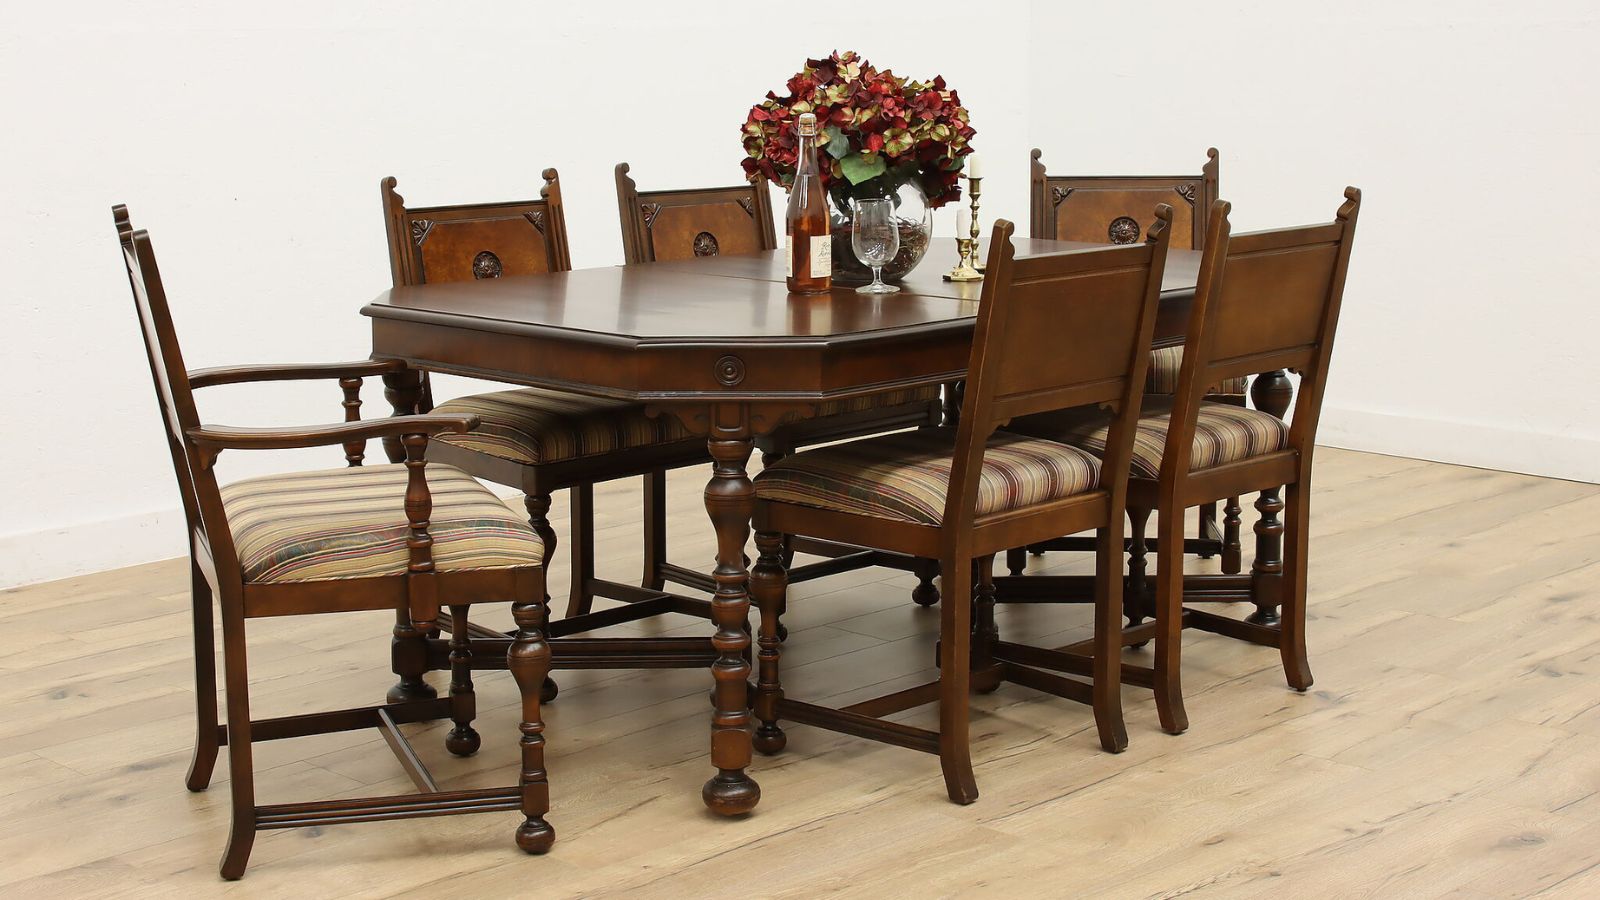 Identifying Antique Dining Table Styles